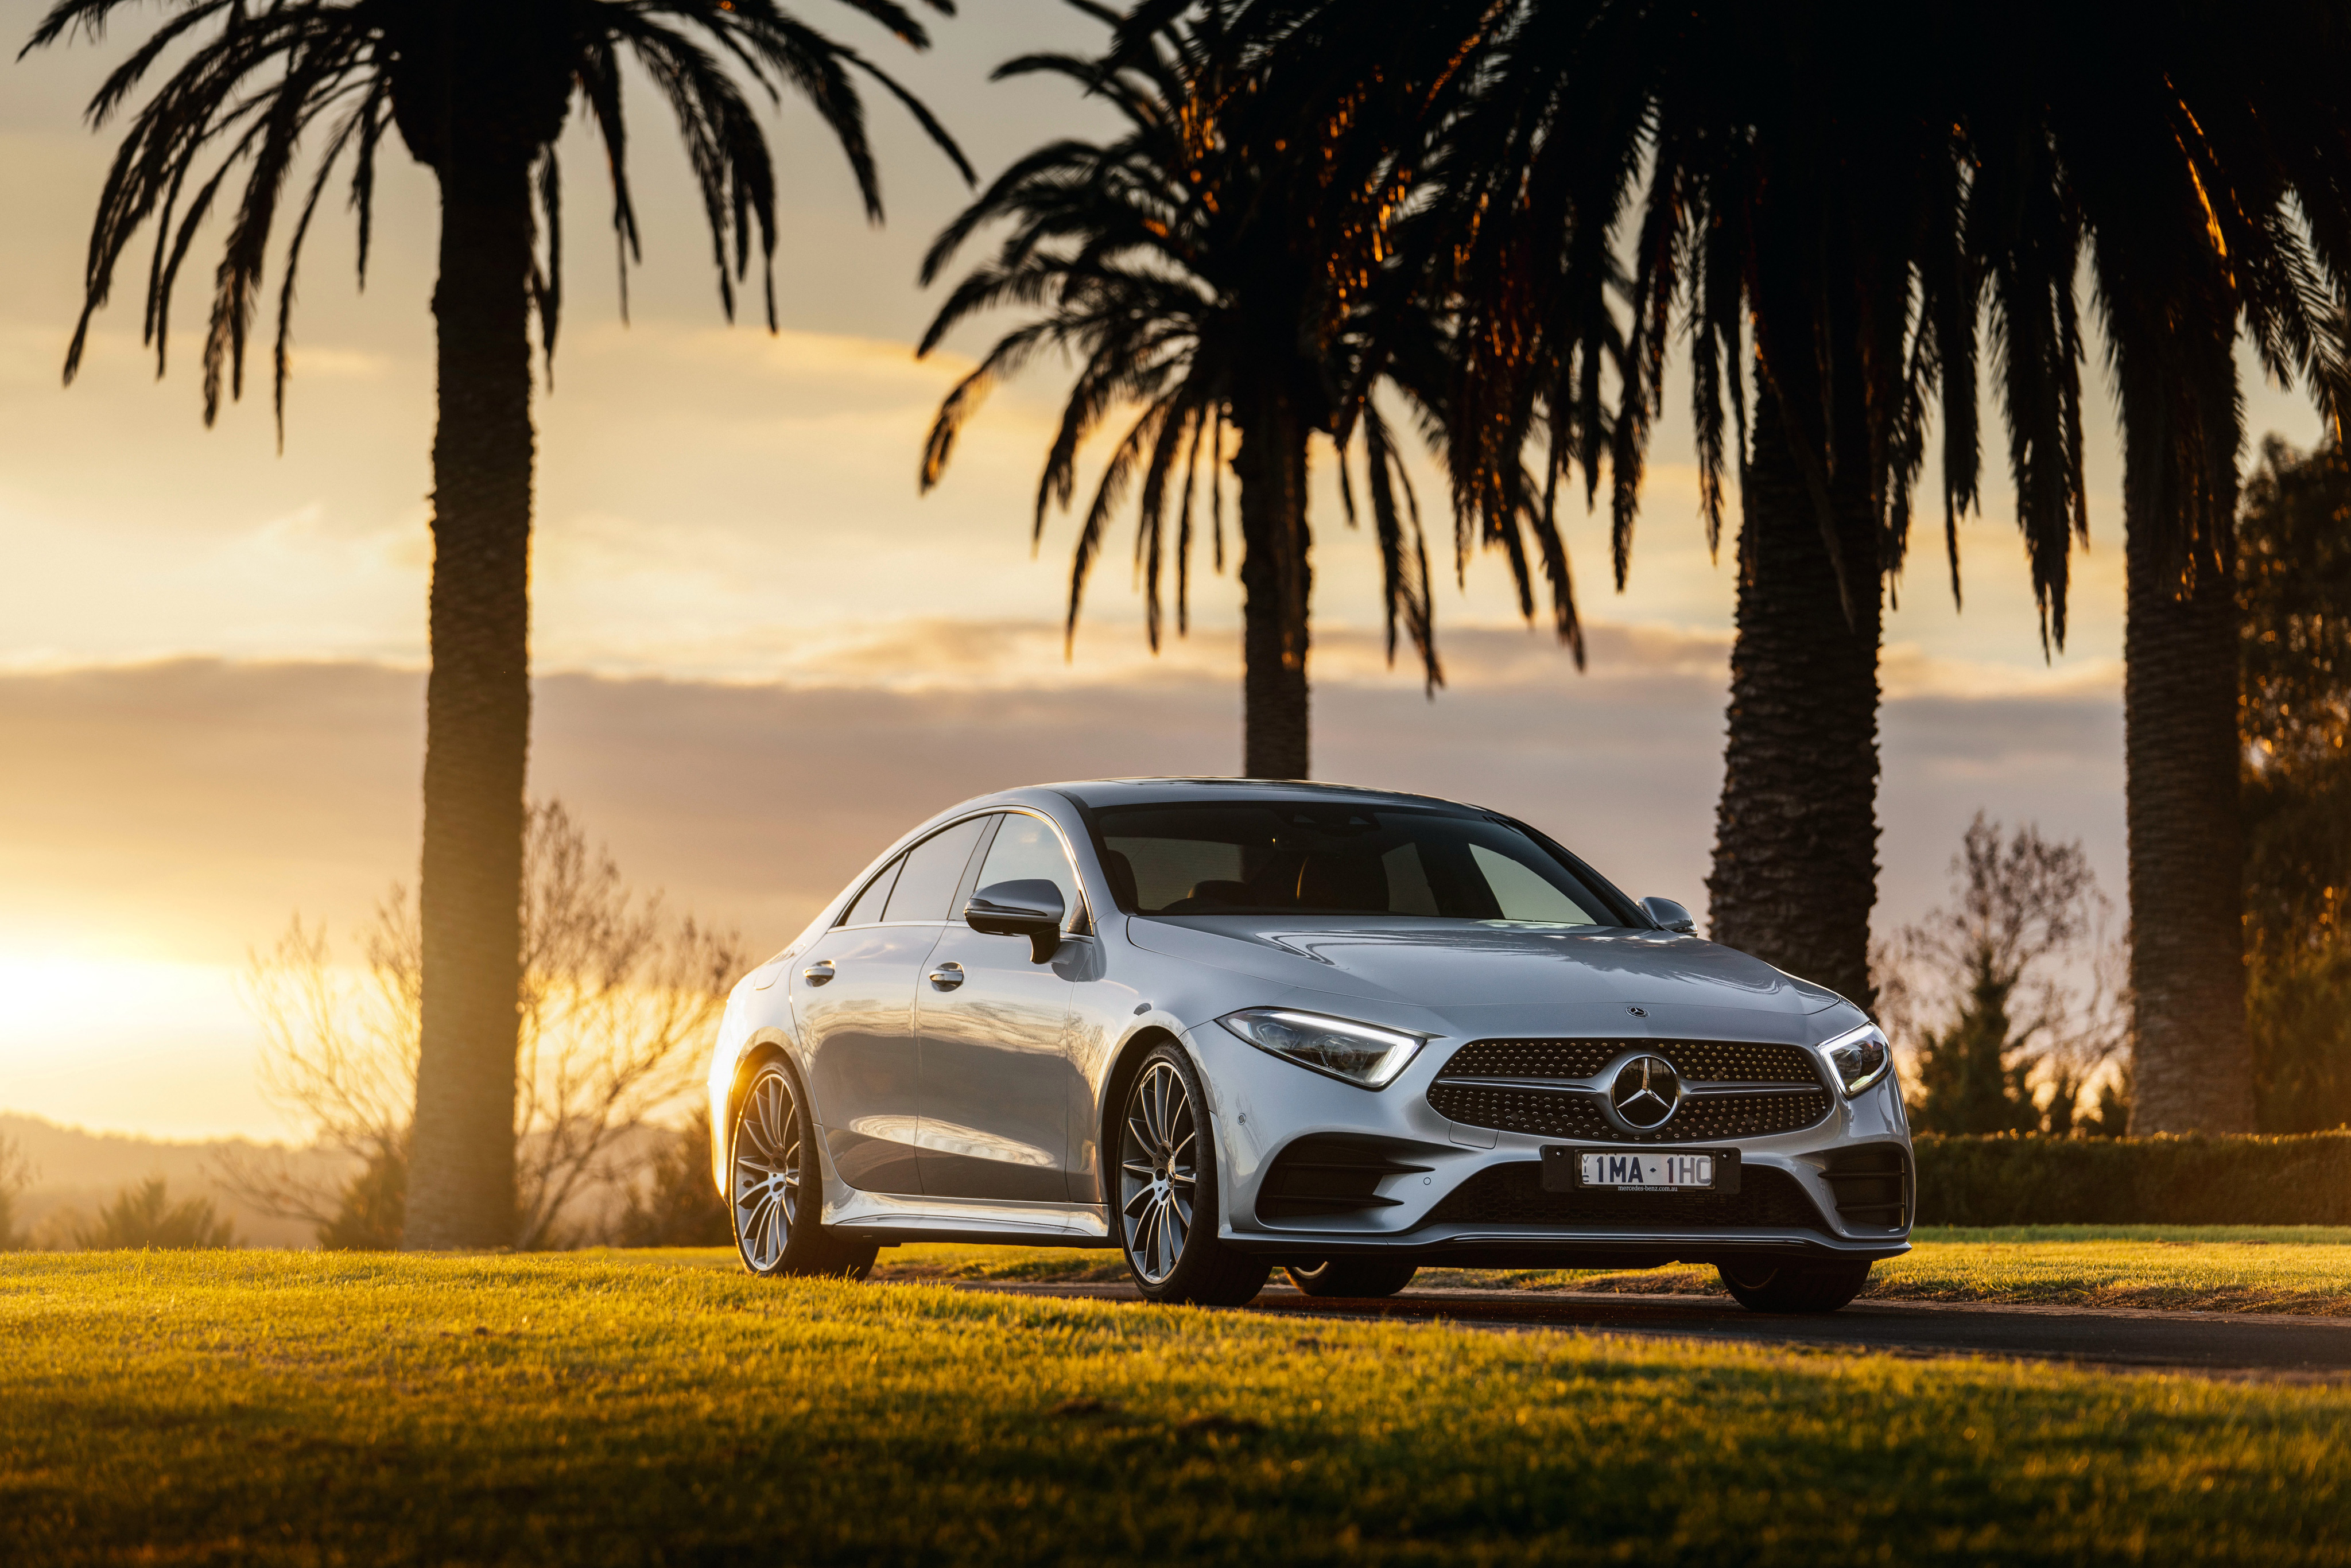 Mercedes Benz CLS 450 4MATIC AMG Line 2018, HD Cars, 4k Wallpapers ...